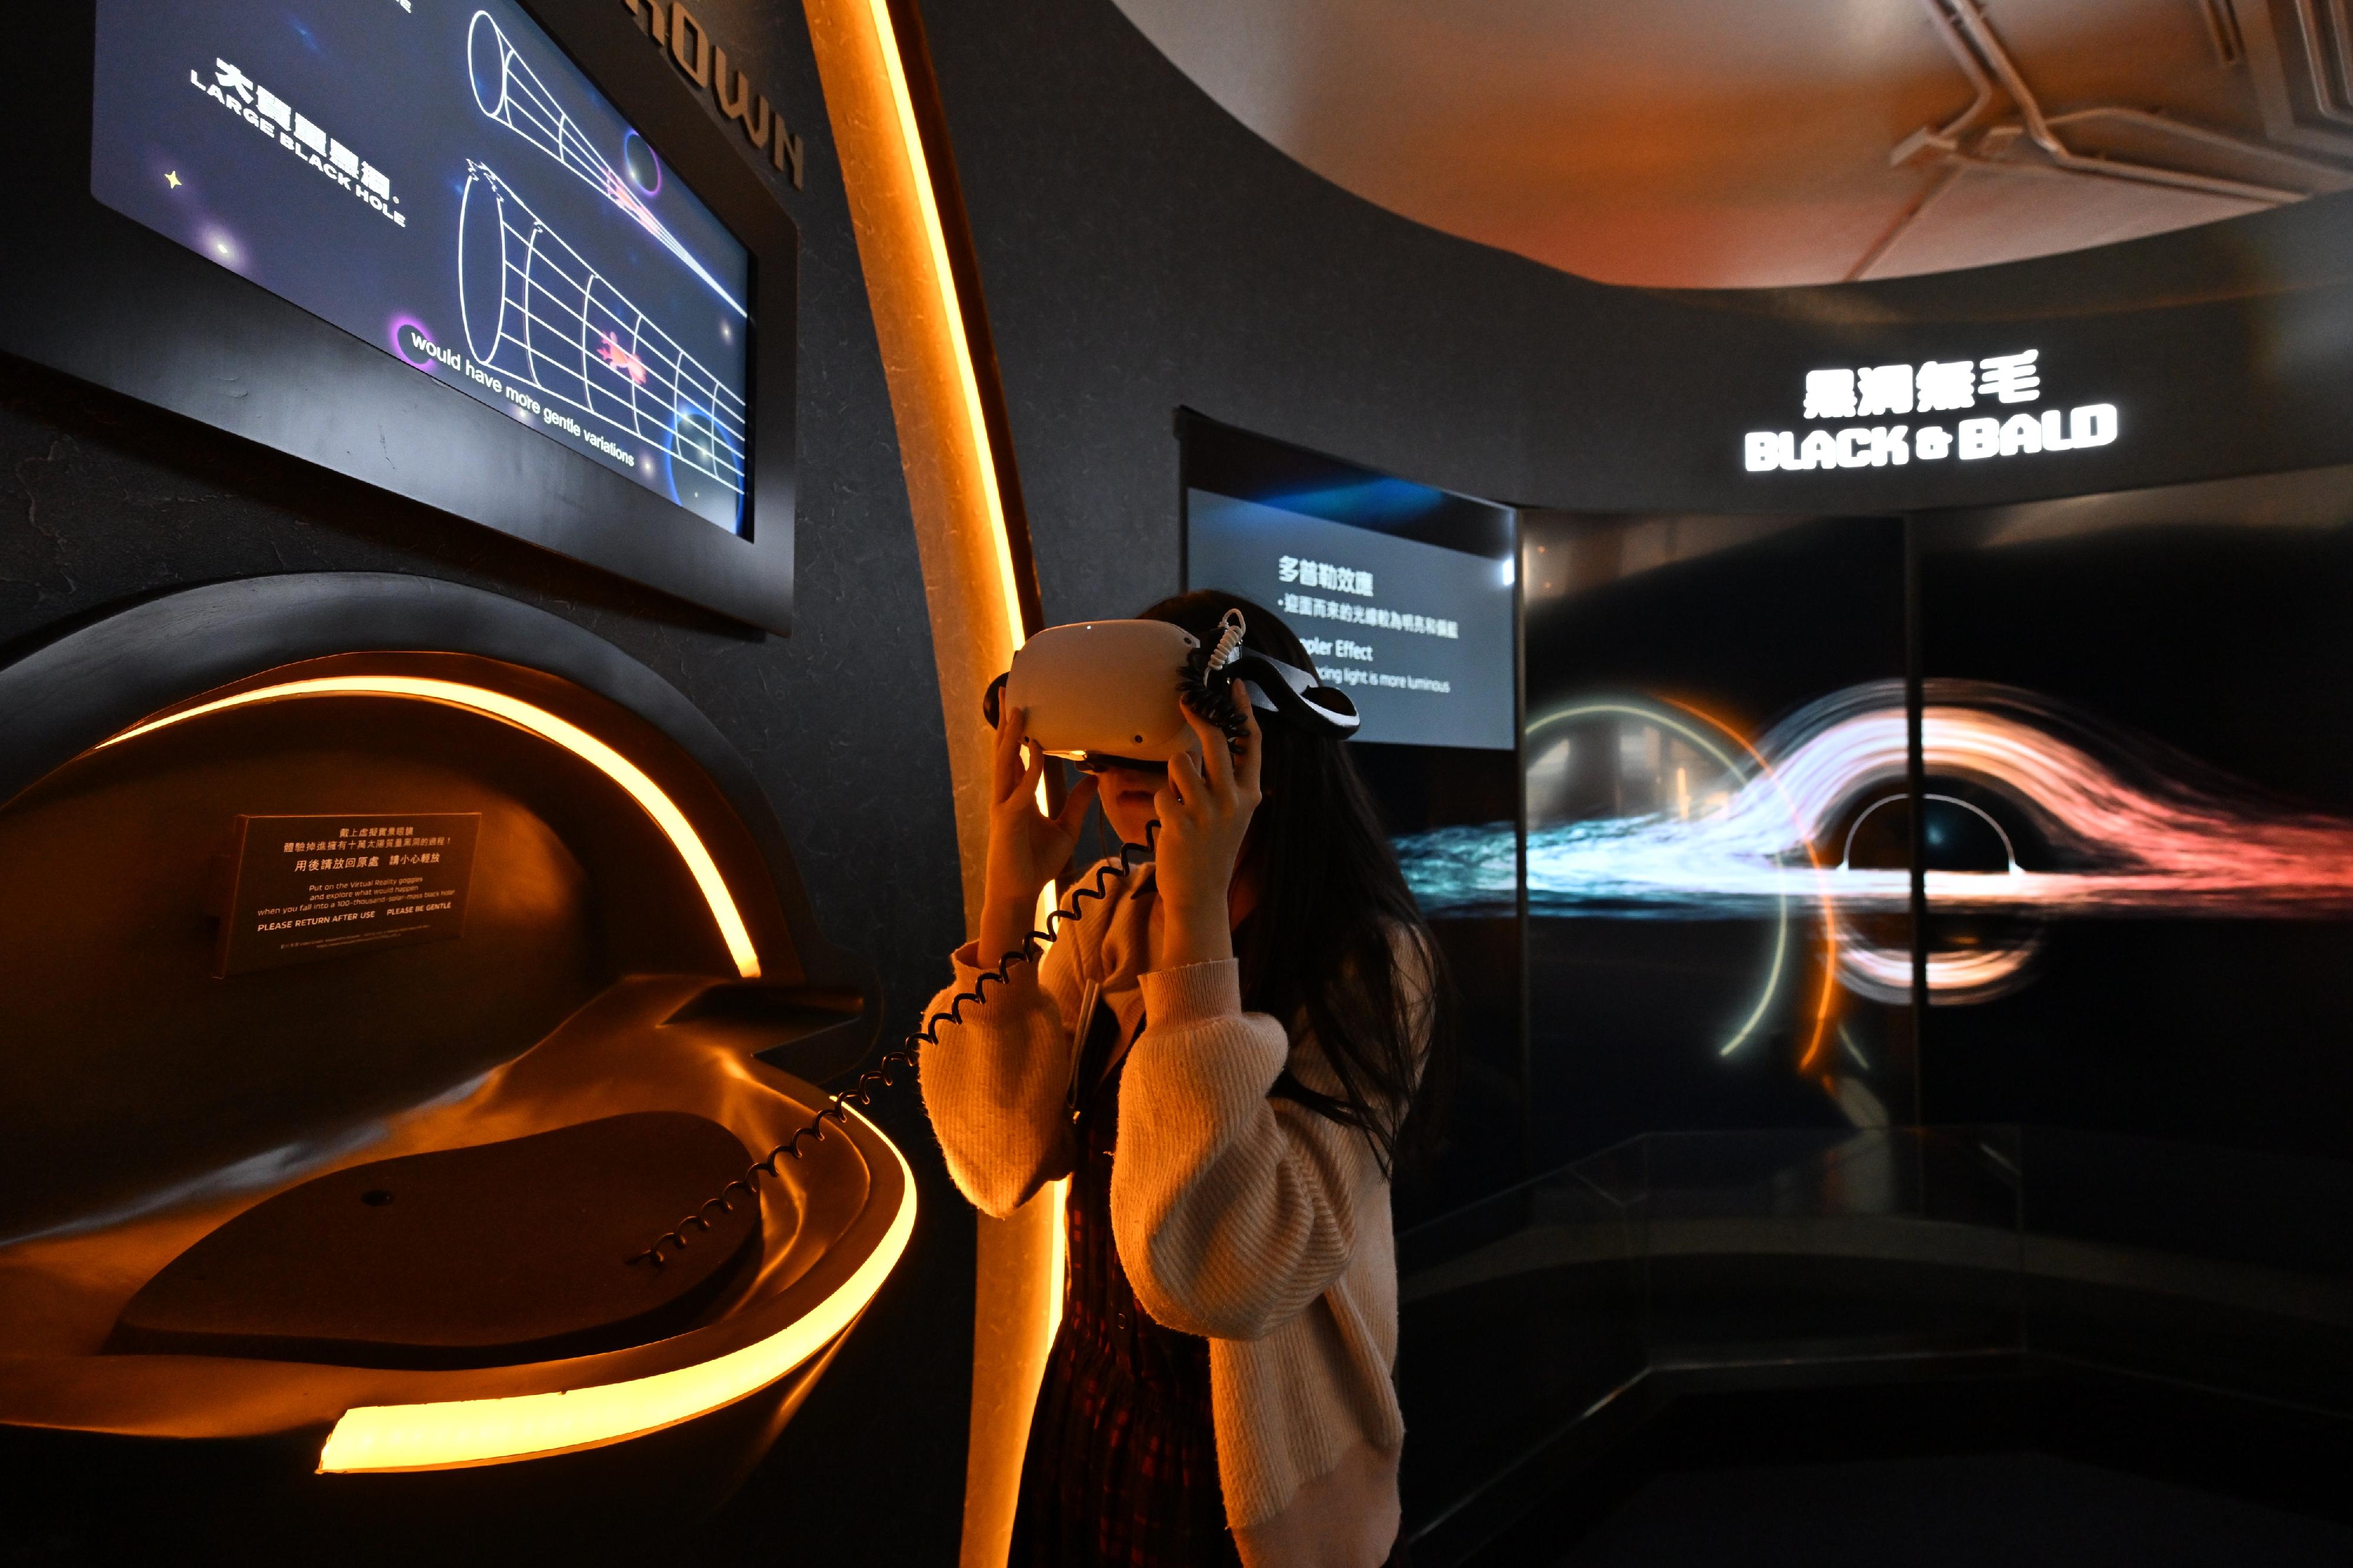 The Hong Kong Space Museum will launch a new free special exhibition, "Black Hole: The Information Barrier", starting tomorrow (October 25). The virtual reality goggles at the exhibition simulate the process of falling into a black hole. 